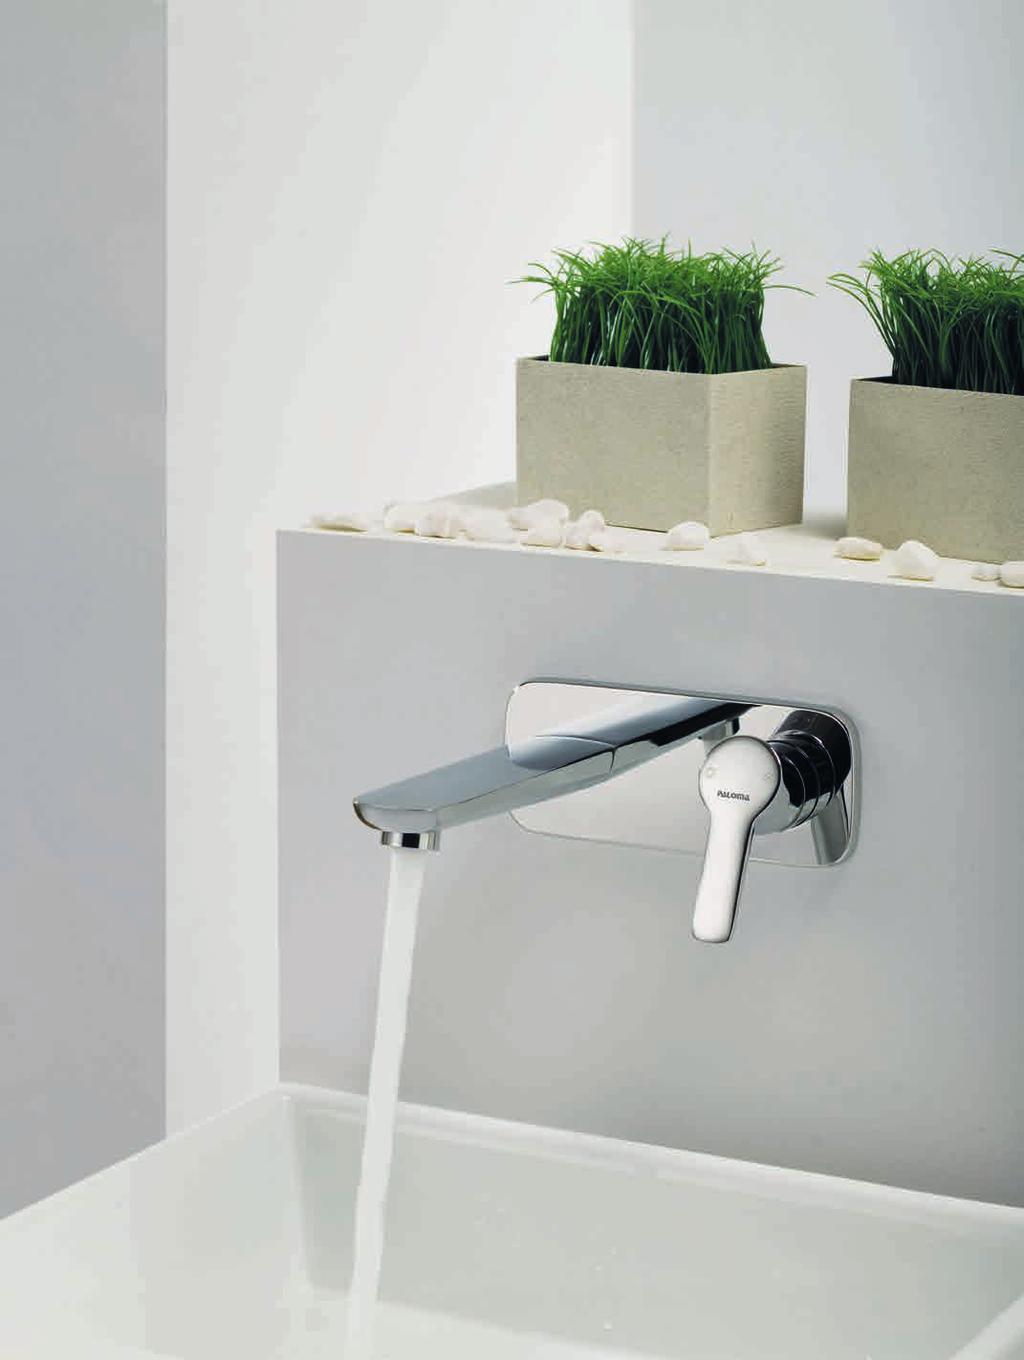 CONCEALED BASIN MIXER As to the bathroom with modern design style, the concealed basin mixer is